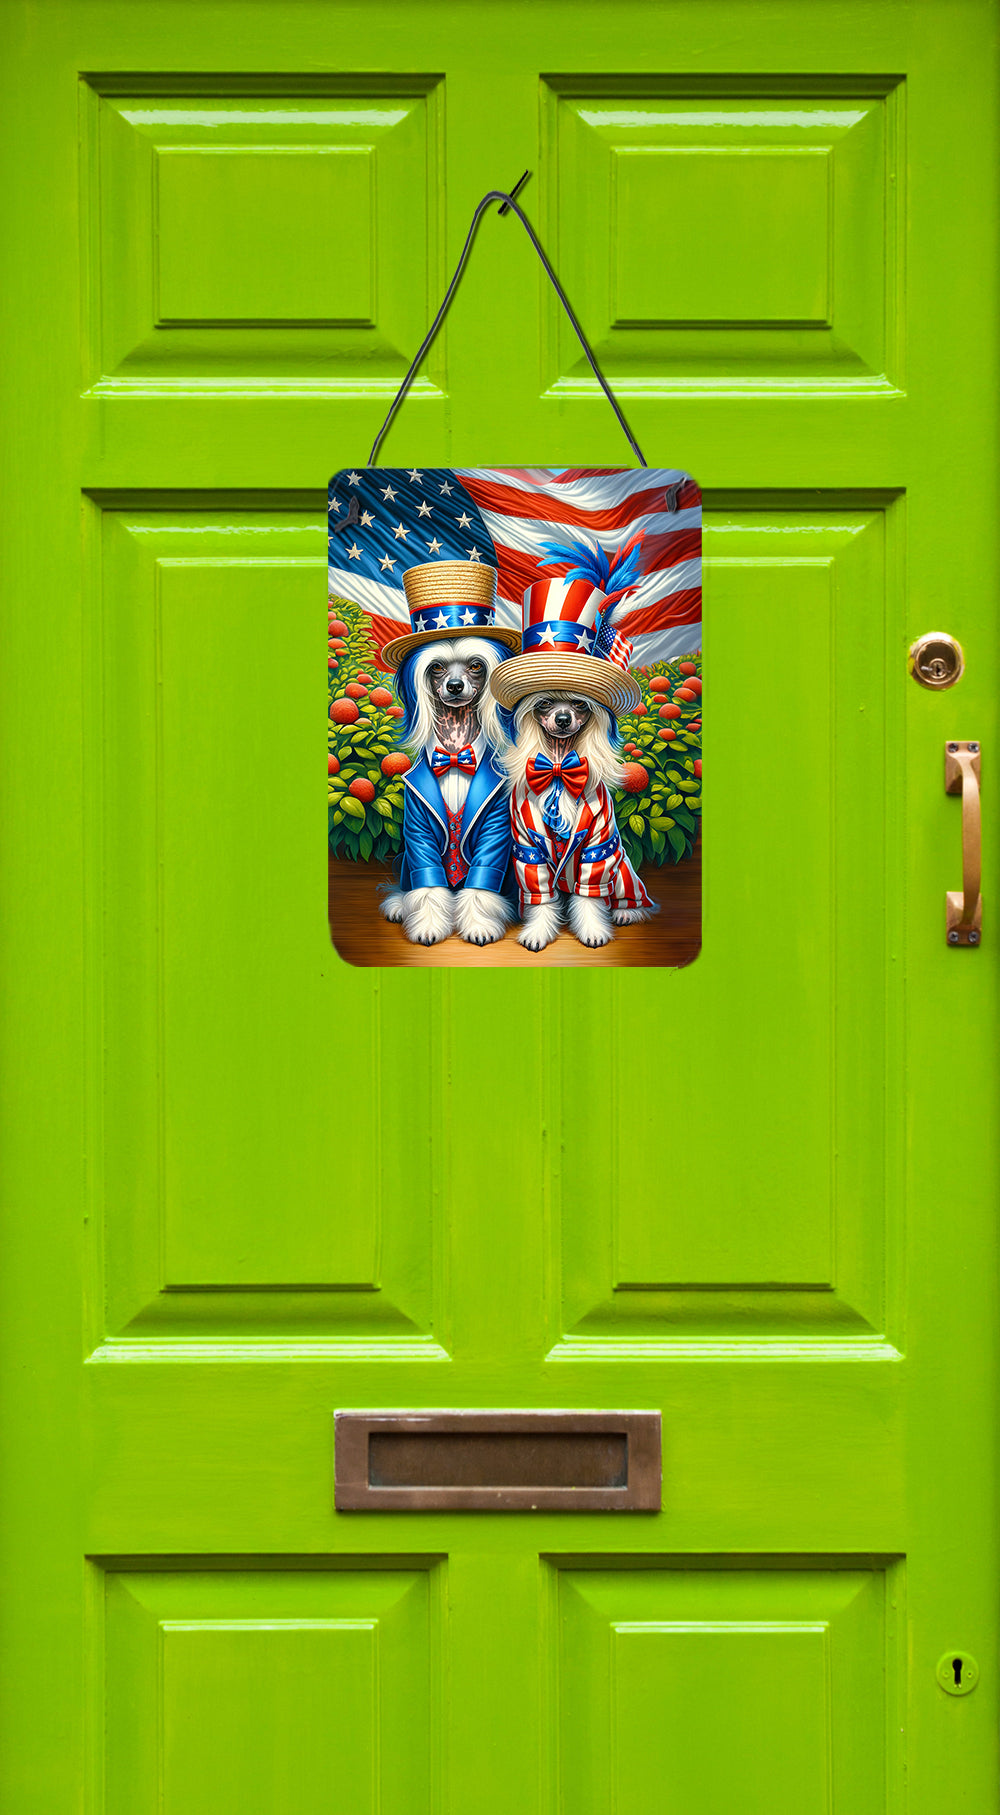 Buy this All American Chinese Crested Wall or Door Hanging Prints